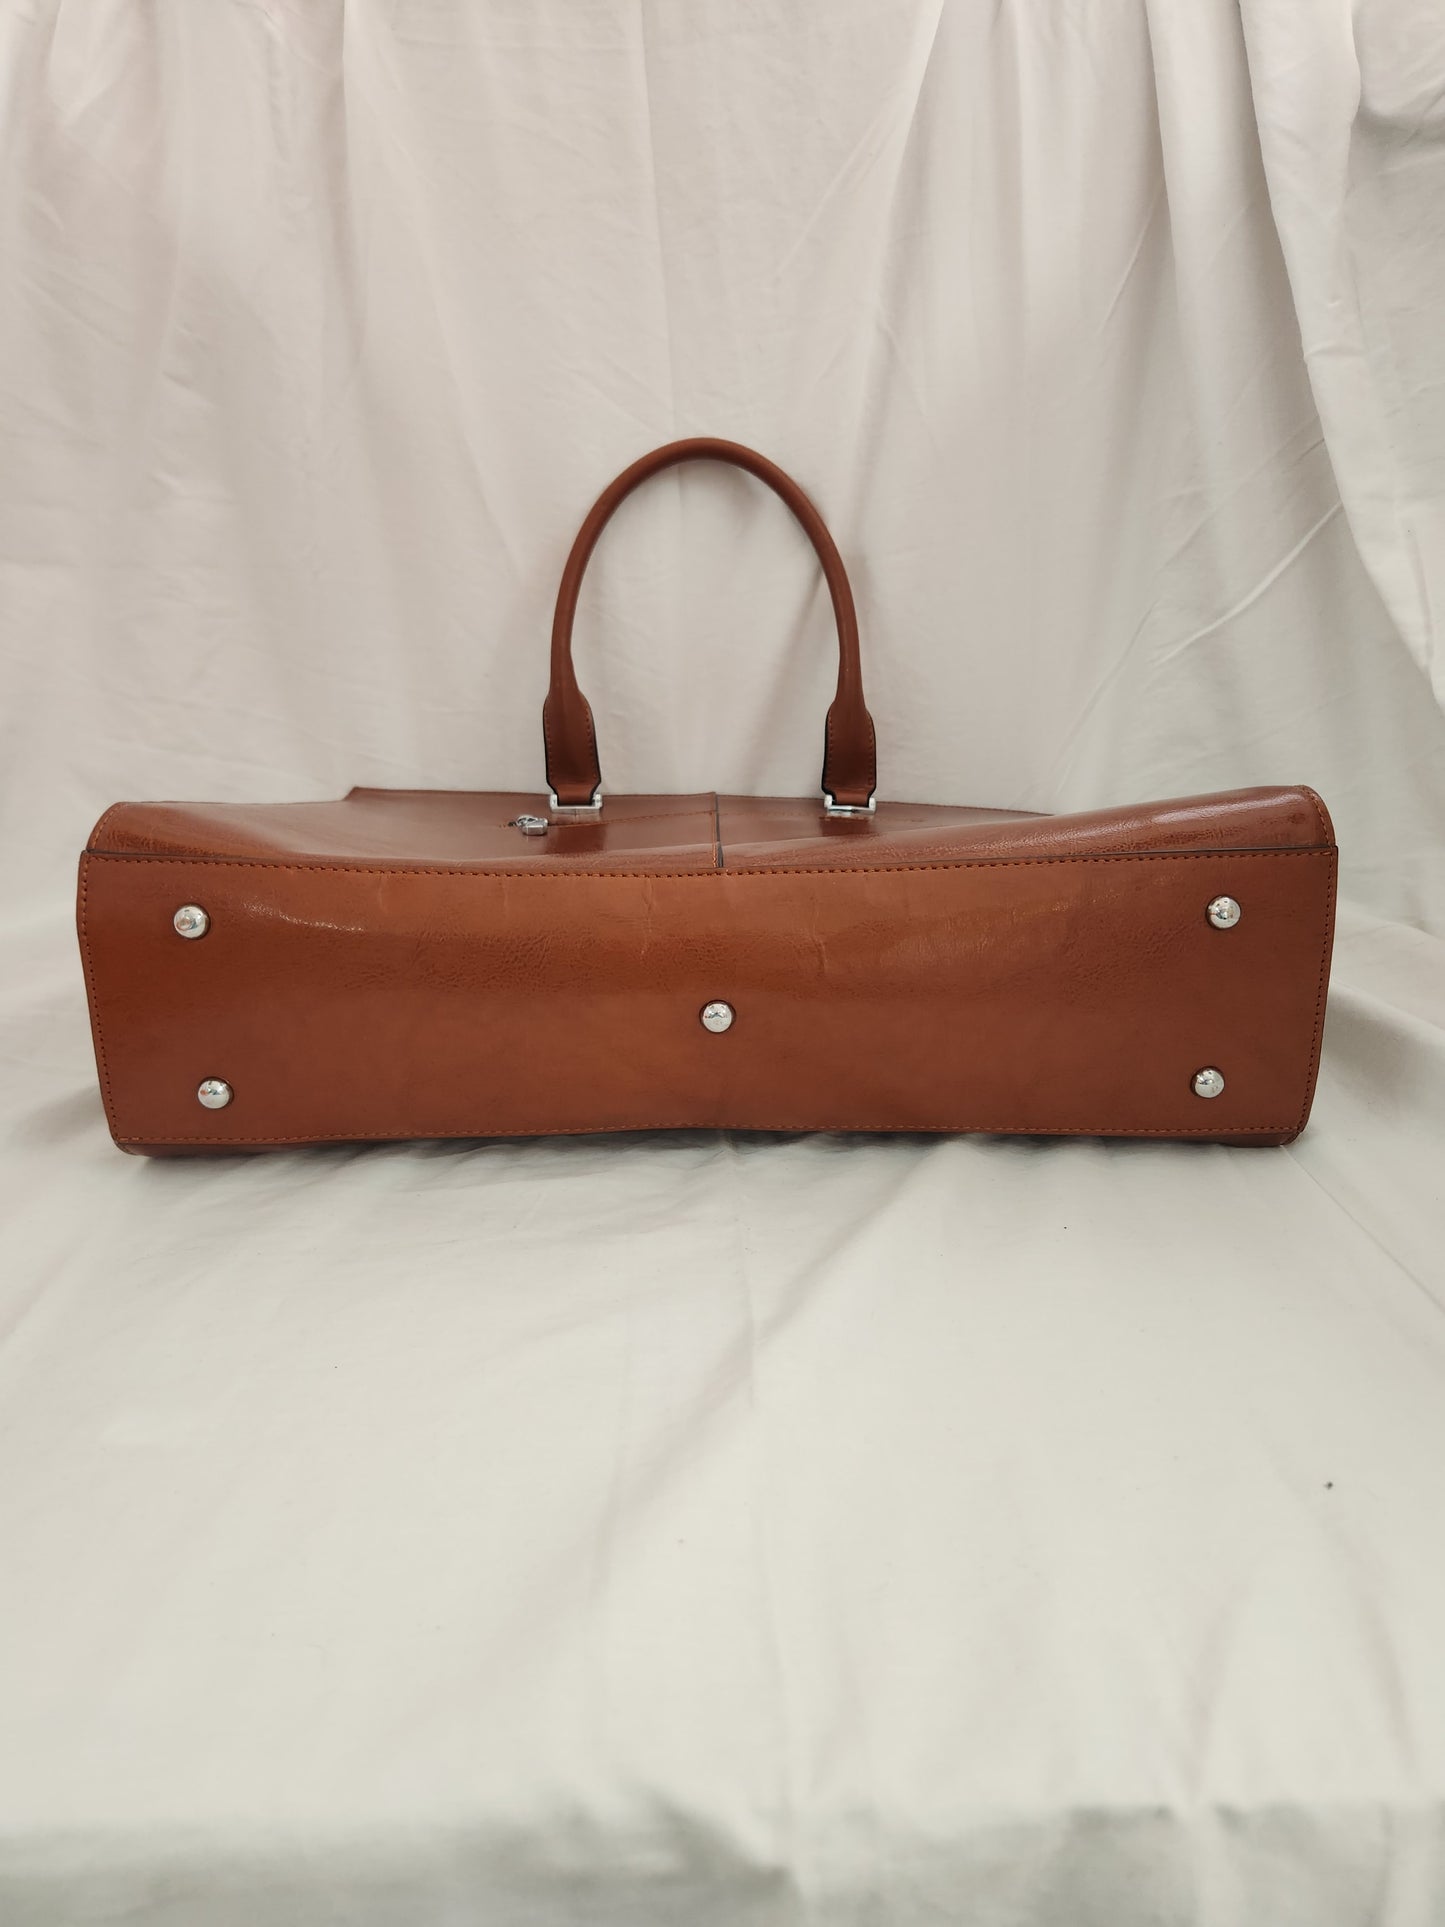 CLUCI Genuine Leather Briefcase holds a slim 15.6 Inch Laptop